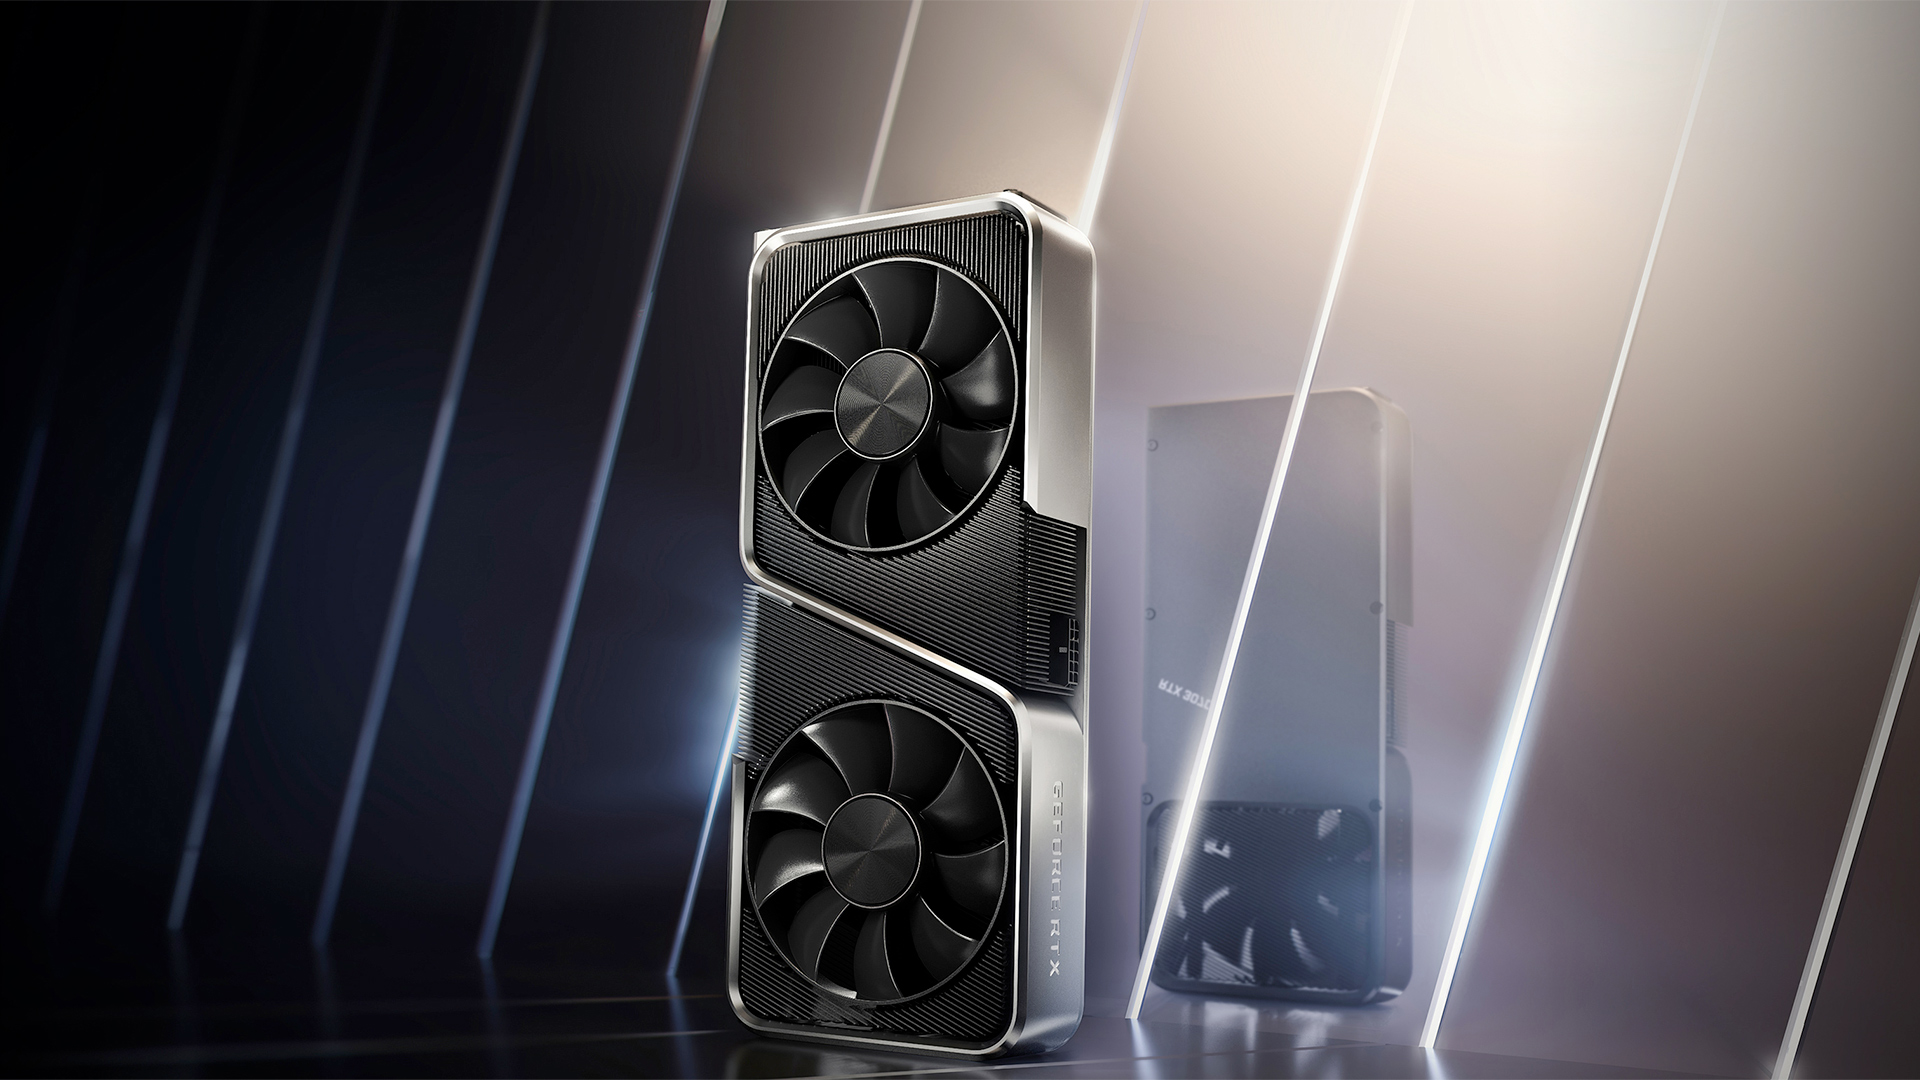 alleged-geforce-rtx-3070-ti-&-rtx-3080-ti-specifications-appear-in-rra-listing